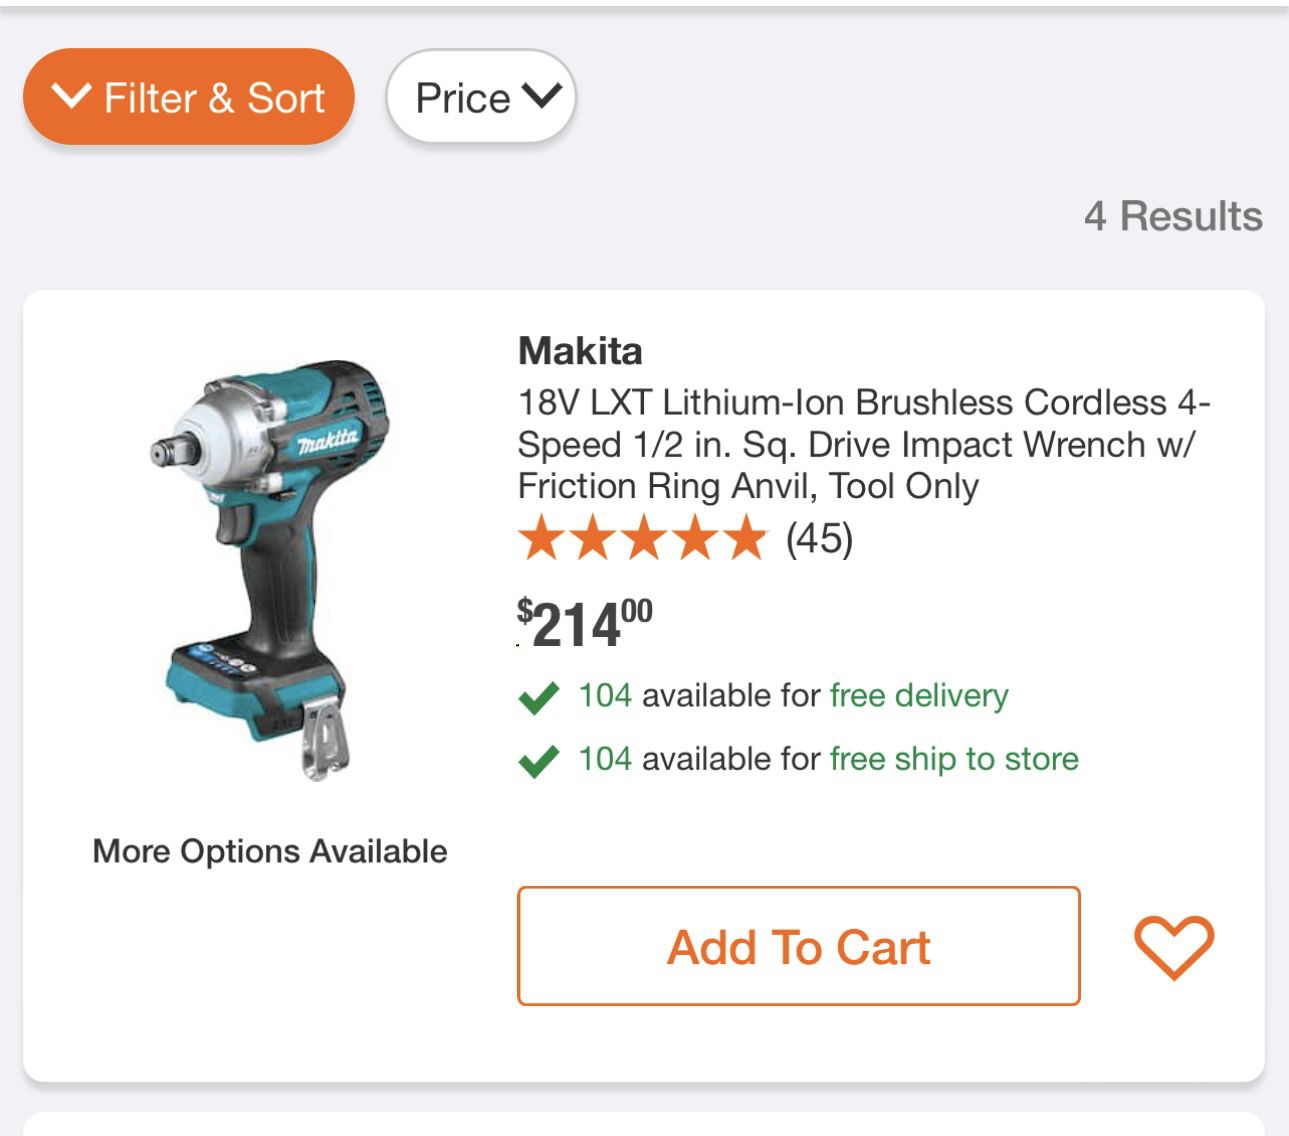 Makita 18V LXT Lithium-Ion Brushless Cordless 4-Speed 1/2 in. Sq. Drive  Impact Wrench w/ Friction Ring Anvil, Tool Only for Sale in El Cajon, CA  OfferUp